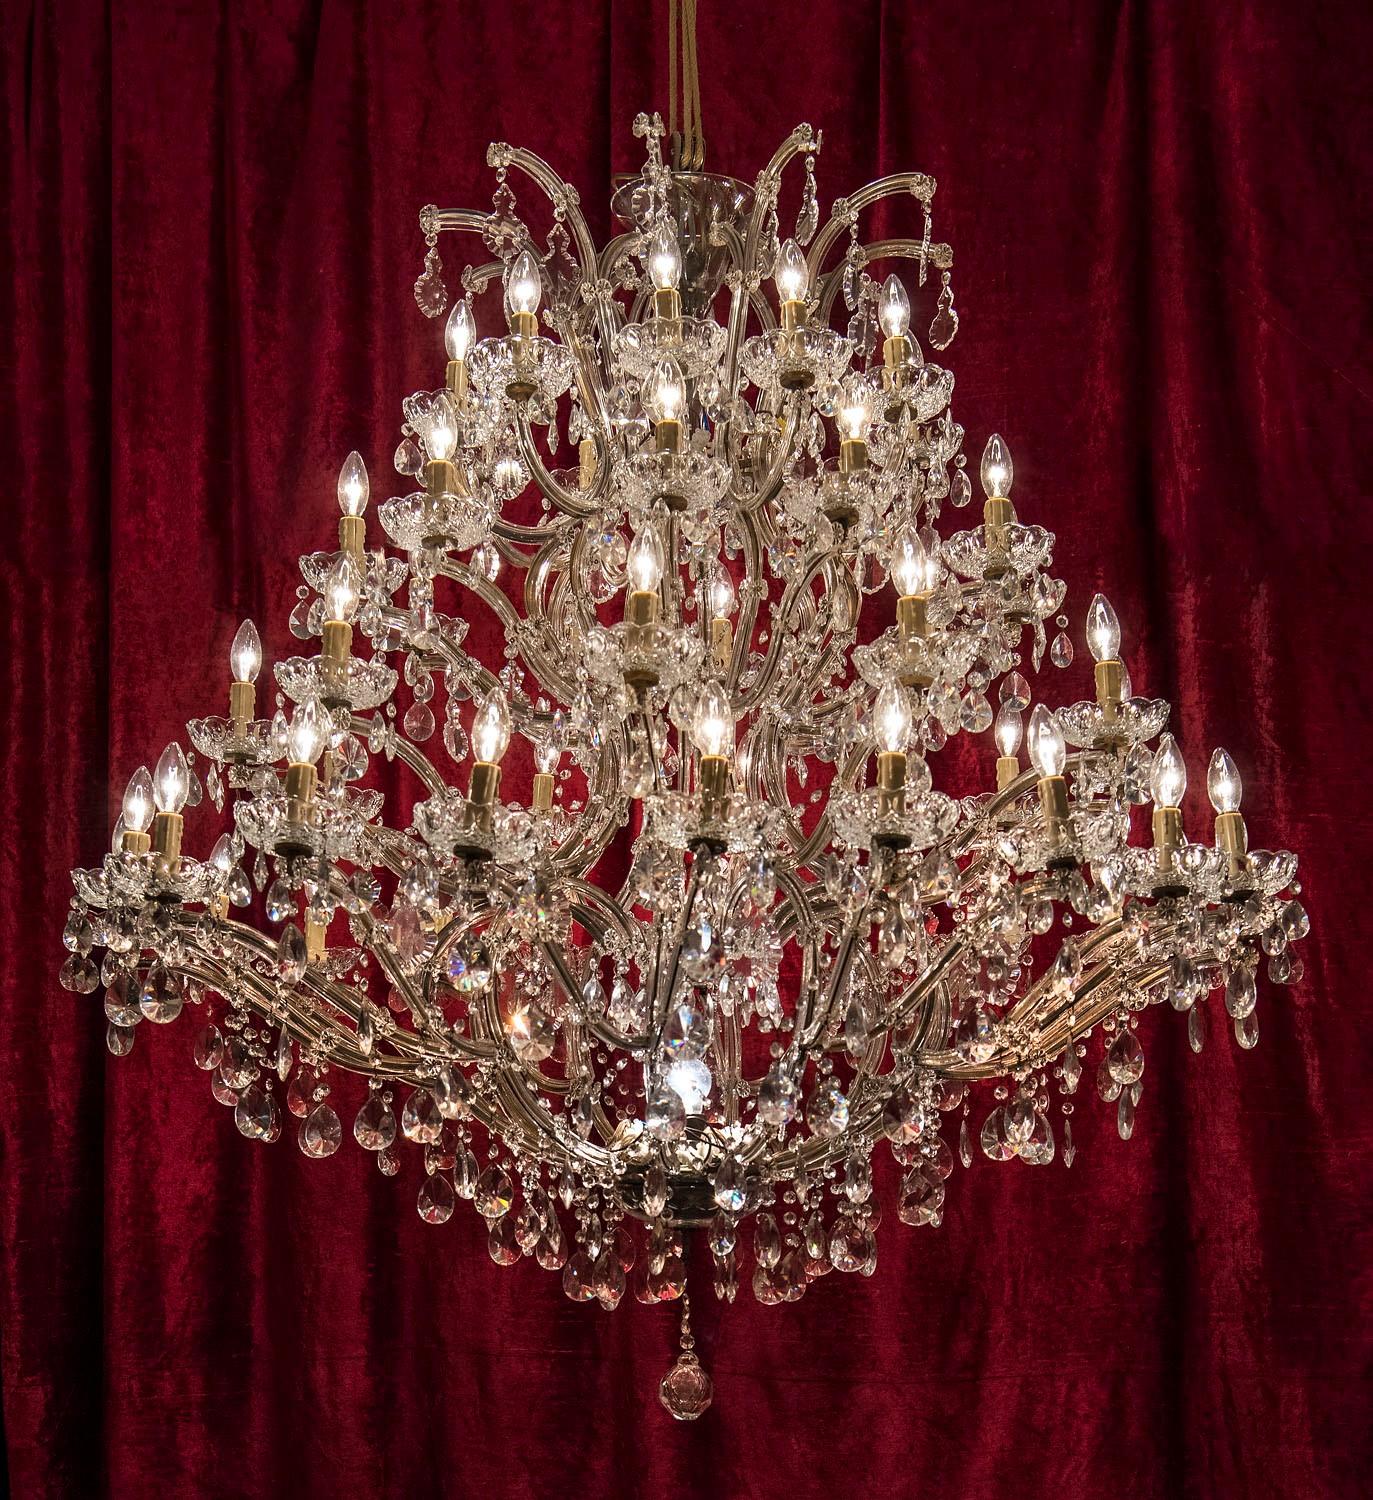 Large Crystal Chandelier of the Extra Class

Opulent chandelier for large rooms or halls.
Hand cut, Bohemian crystal, restored and complete, the original wiring is largely preserved.
Newly electrified according to VDE (german standard, works for EU